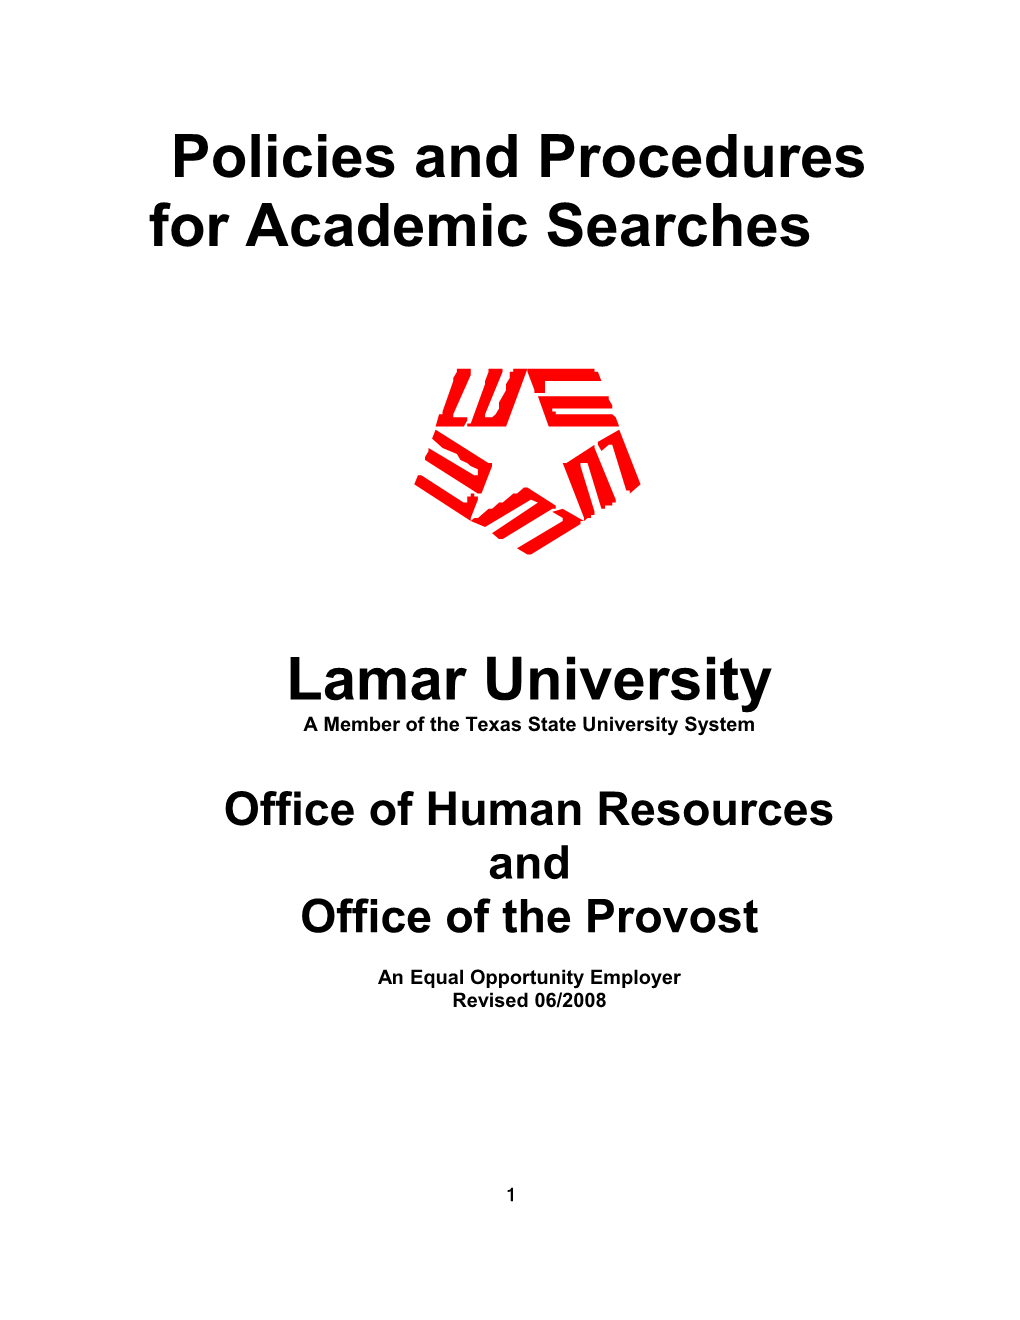 Policies and Procedures for Academic Searches